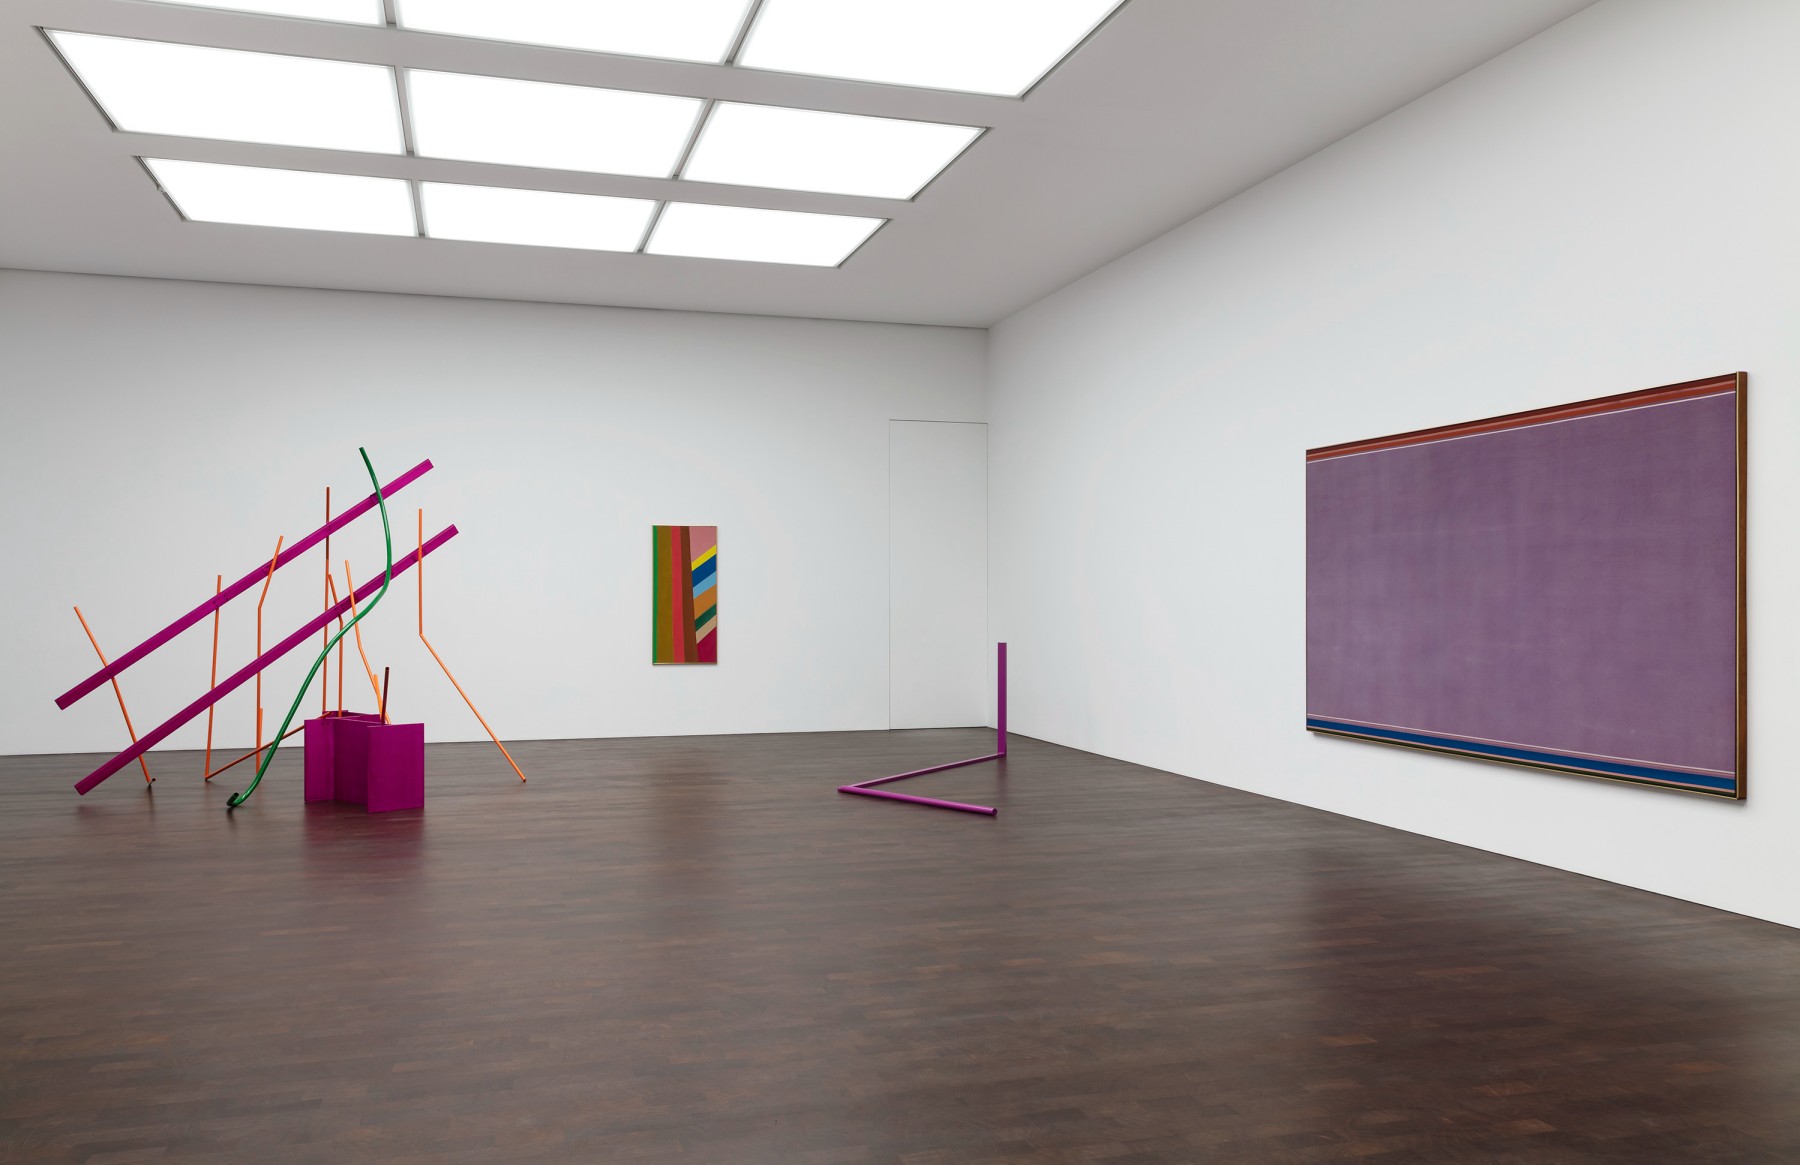 Installation image for Caro and North American Painters, at Gagosian